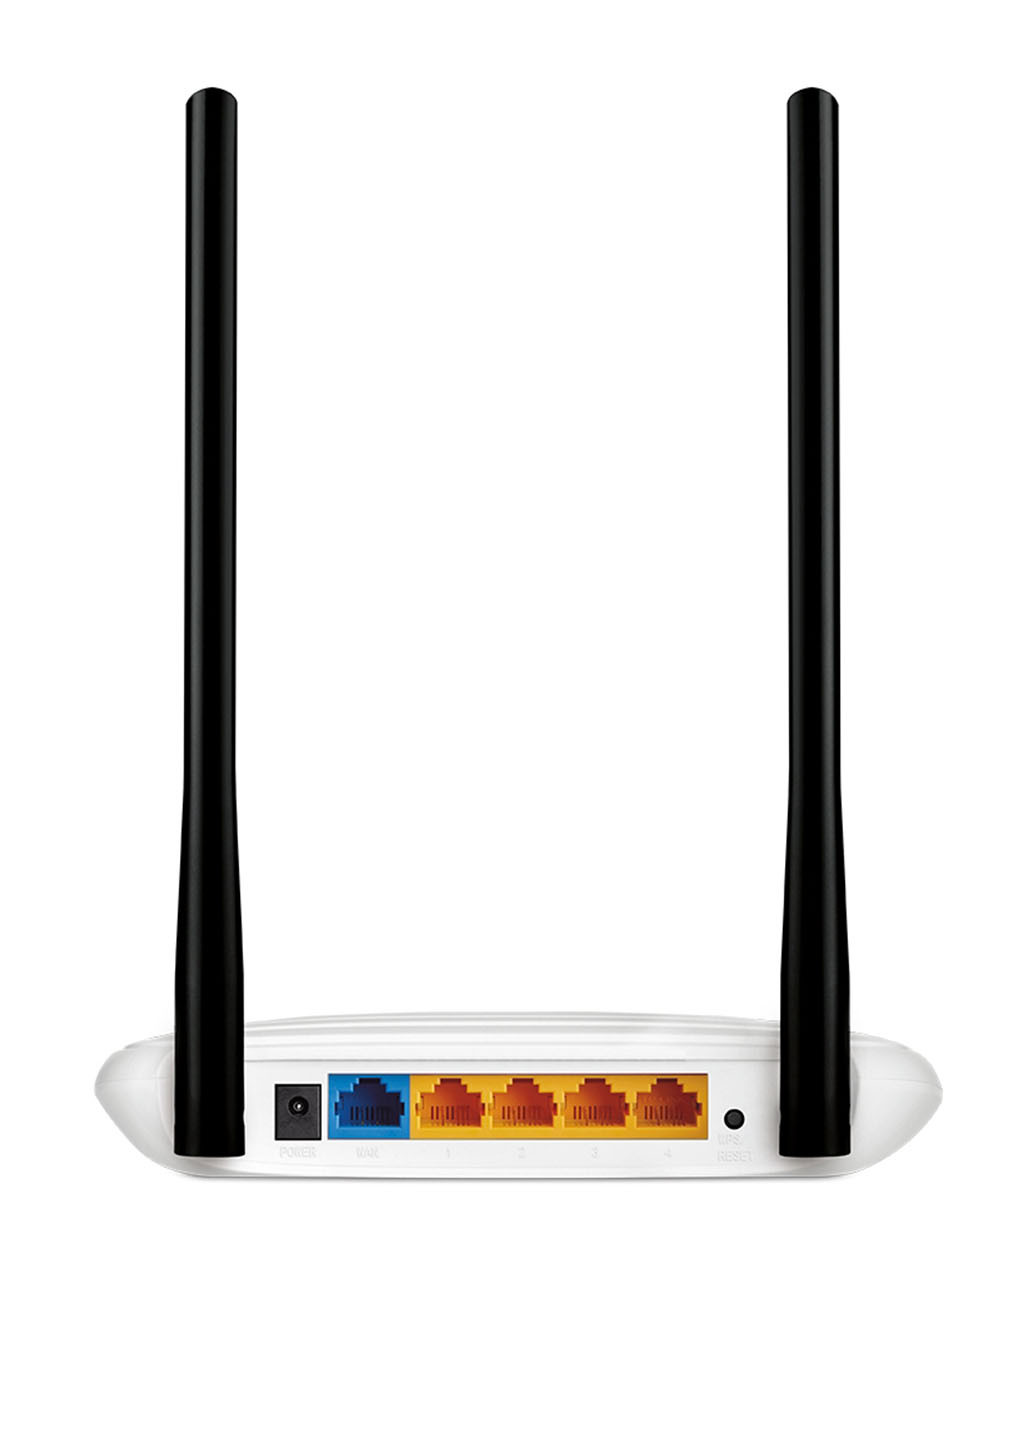 Маршрутизатор TL-WR841N TP-Link маршрутизатор tp-link tl-wr841n (130280721)